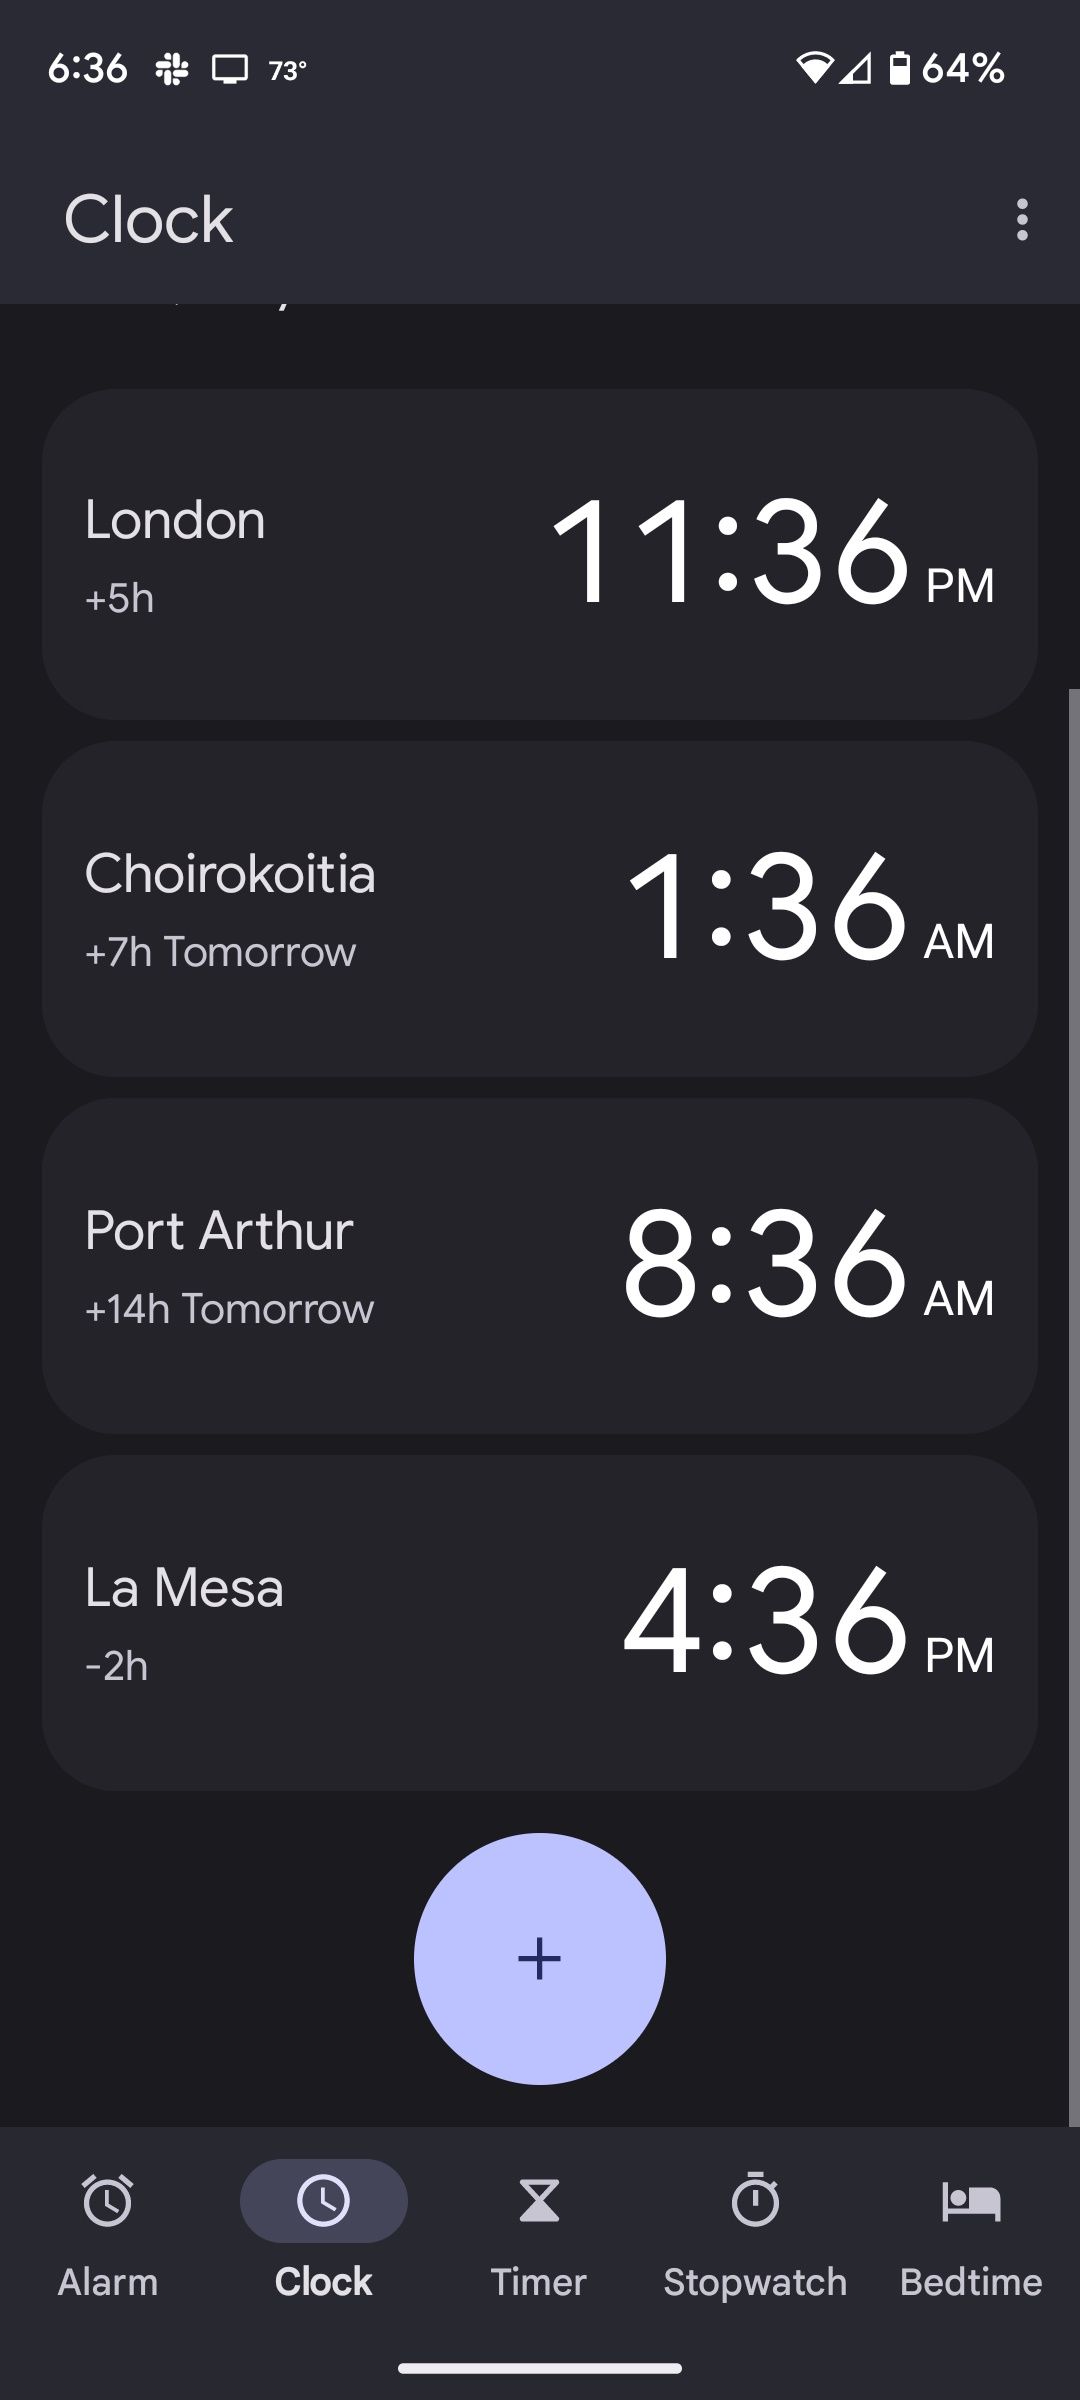 Different cities and time zones in the Android Clock app